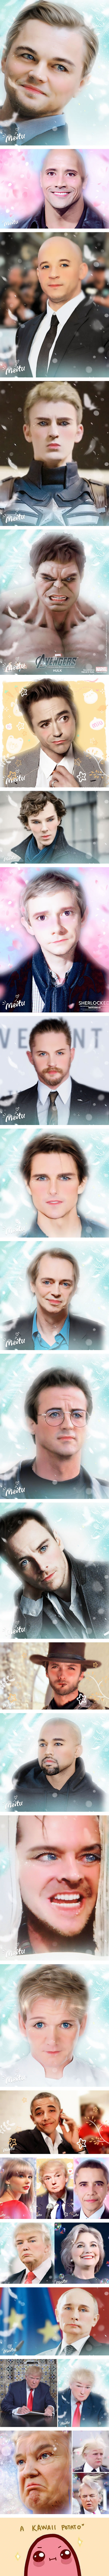 People are turning celebrities into anime-like perfection